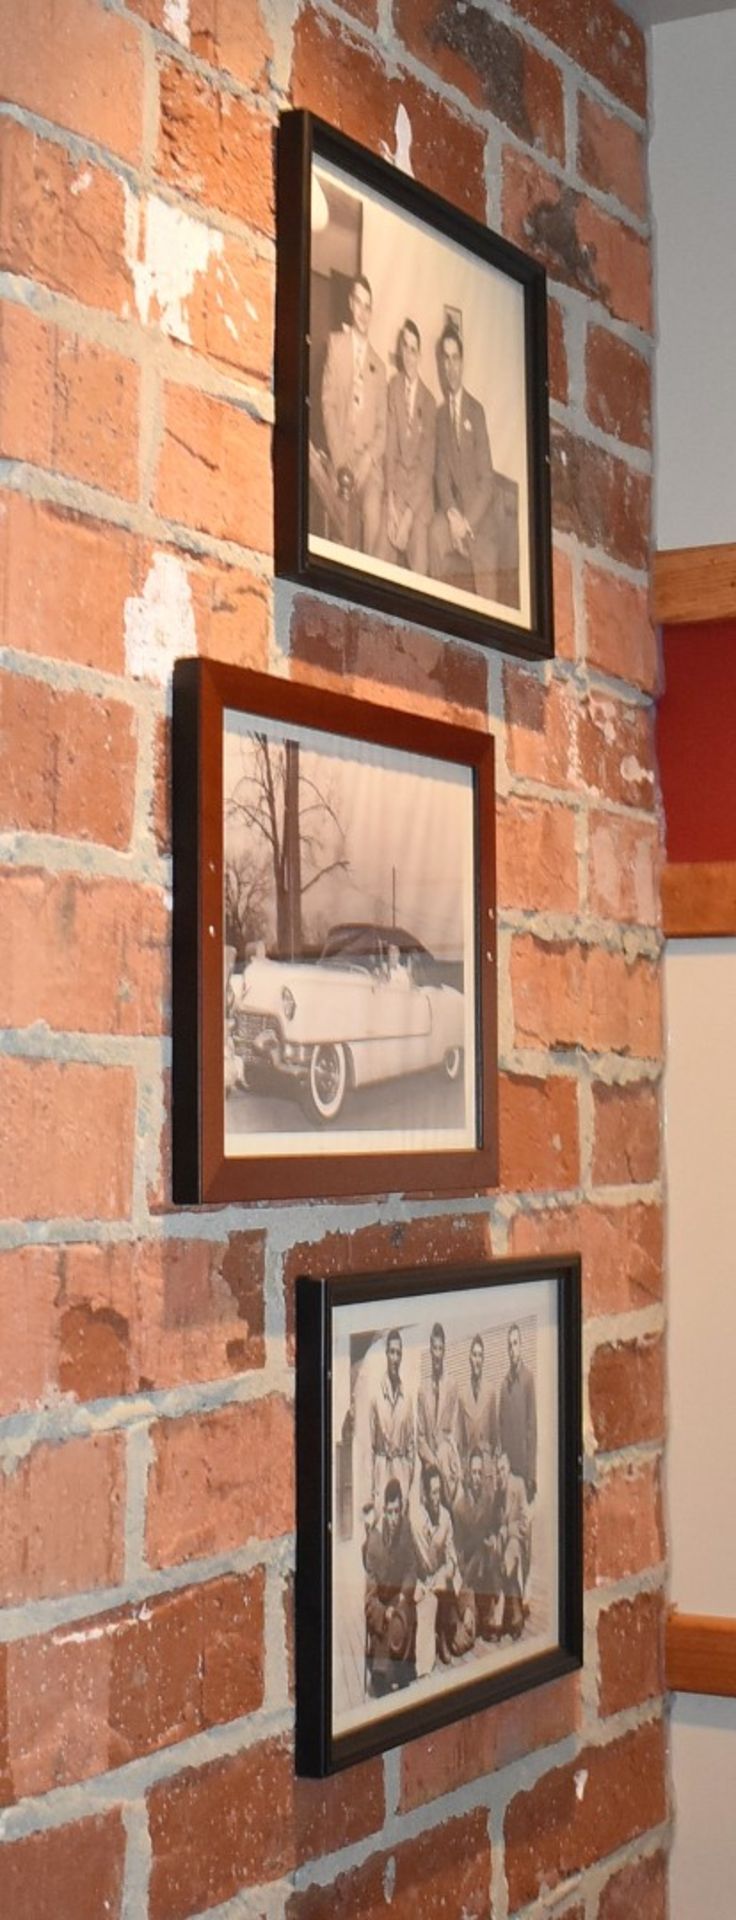 Approx 160 x Assorted Framed Pictures Featuring Nostalgic Images From an Italian-American Restaurant - Image 4 of 31